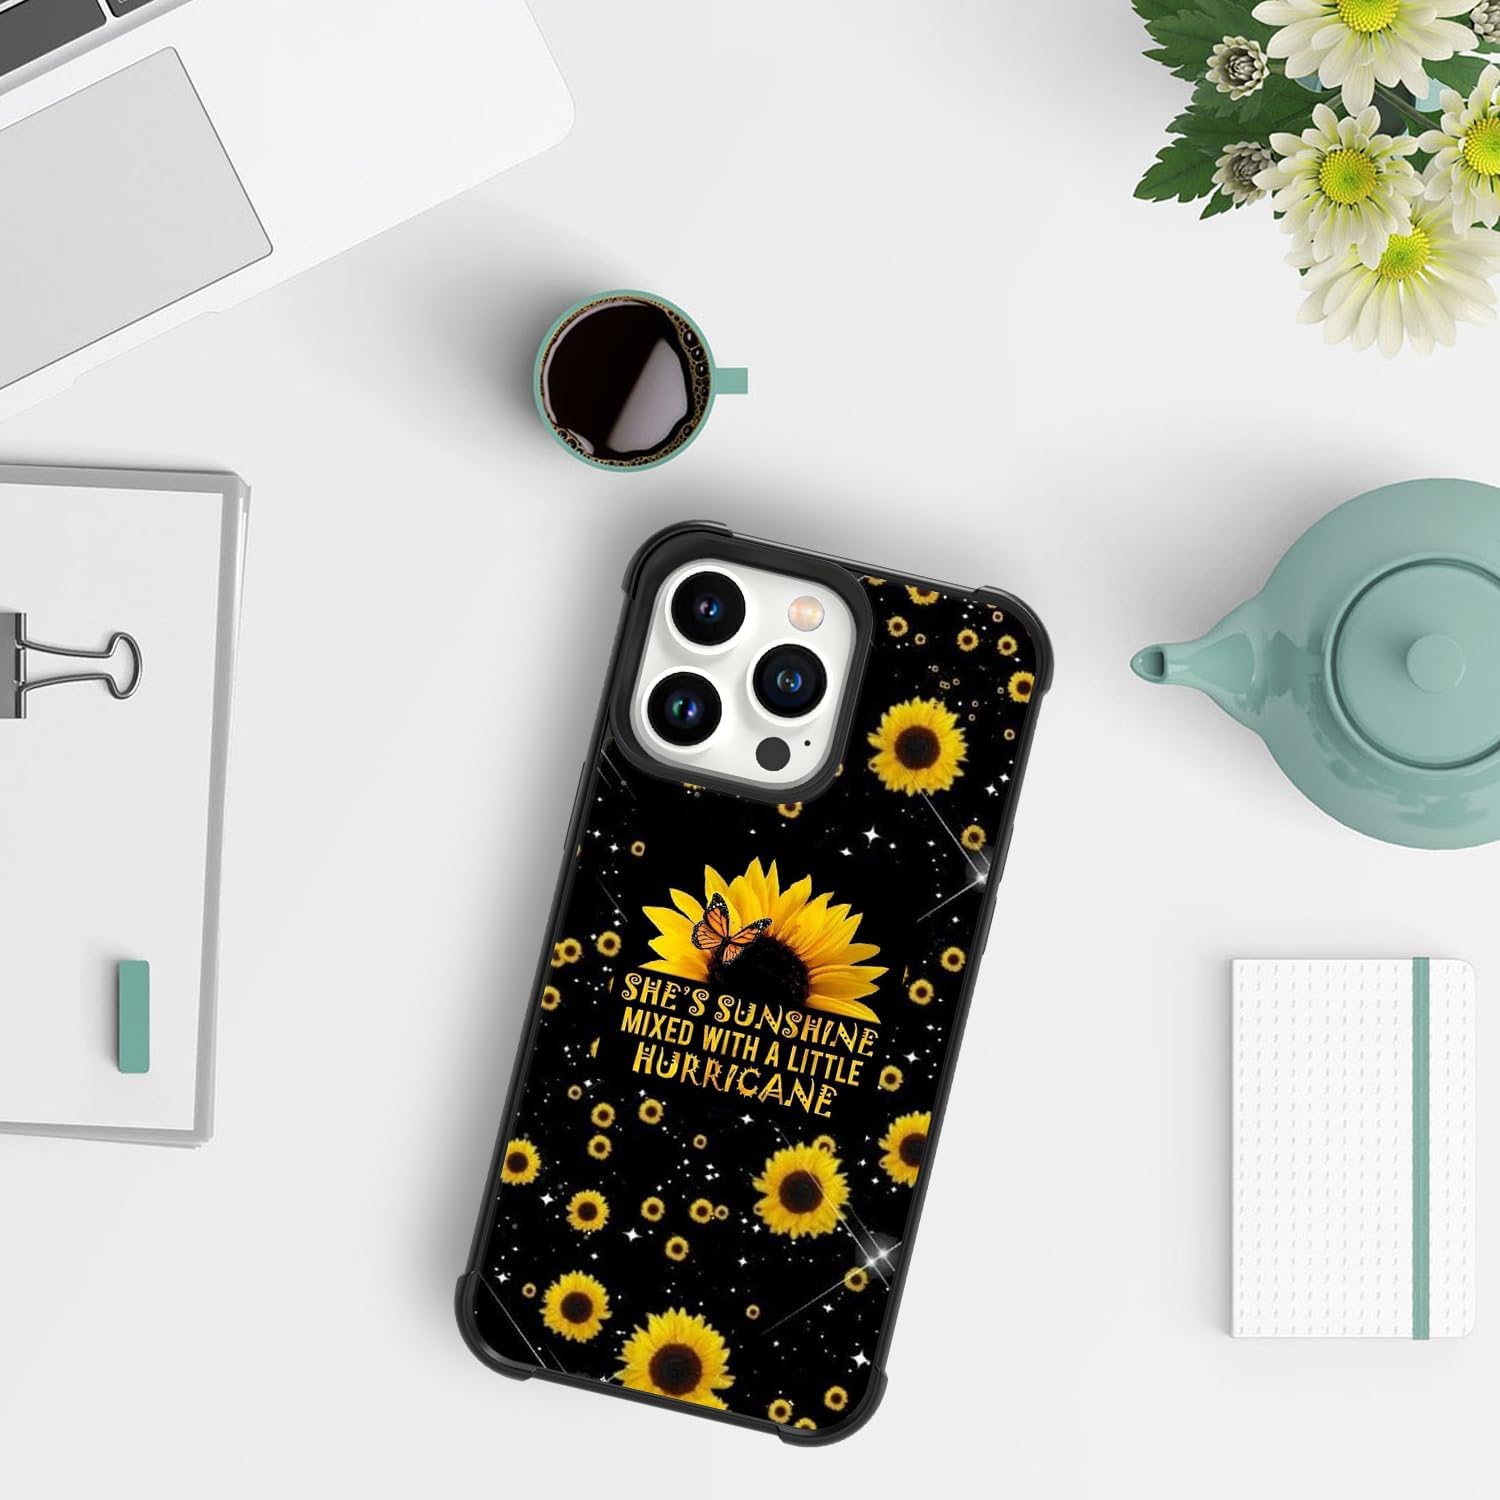 Tnarru Compatible with iPhone 15 Pro Max Case Sunflower Butterflies Pattern [Support Wireless Charging] Hard PC Back and Soft TPU Non-Slip Sides Cover Thin Shockproof Case for iPhone 15 Pro Max 5G